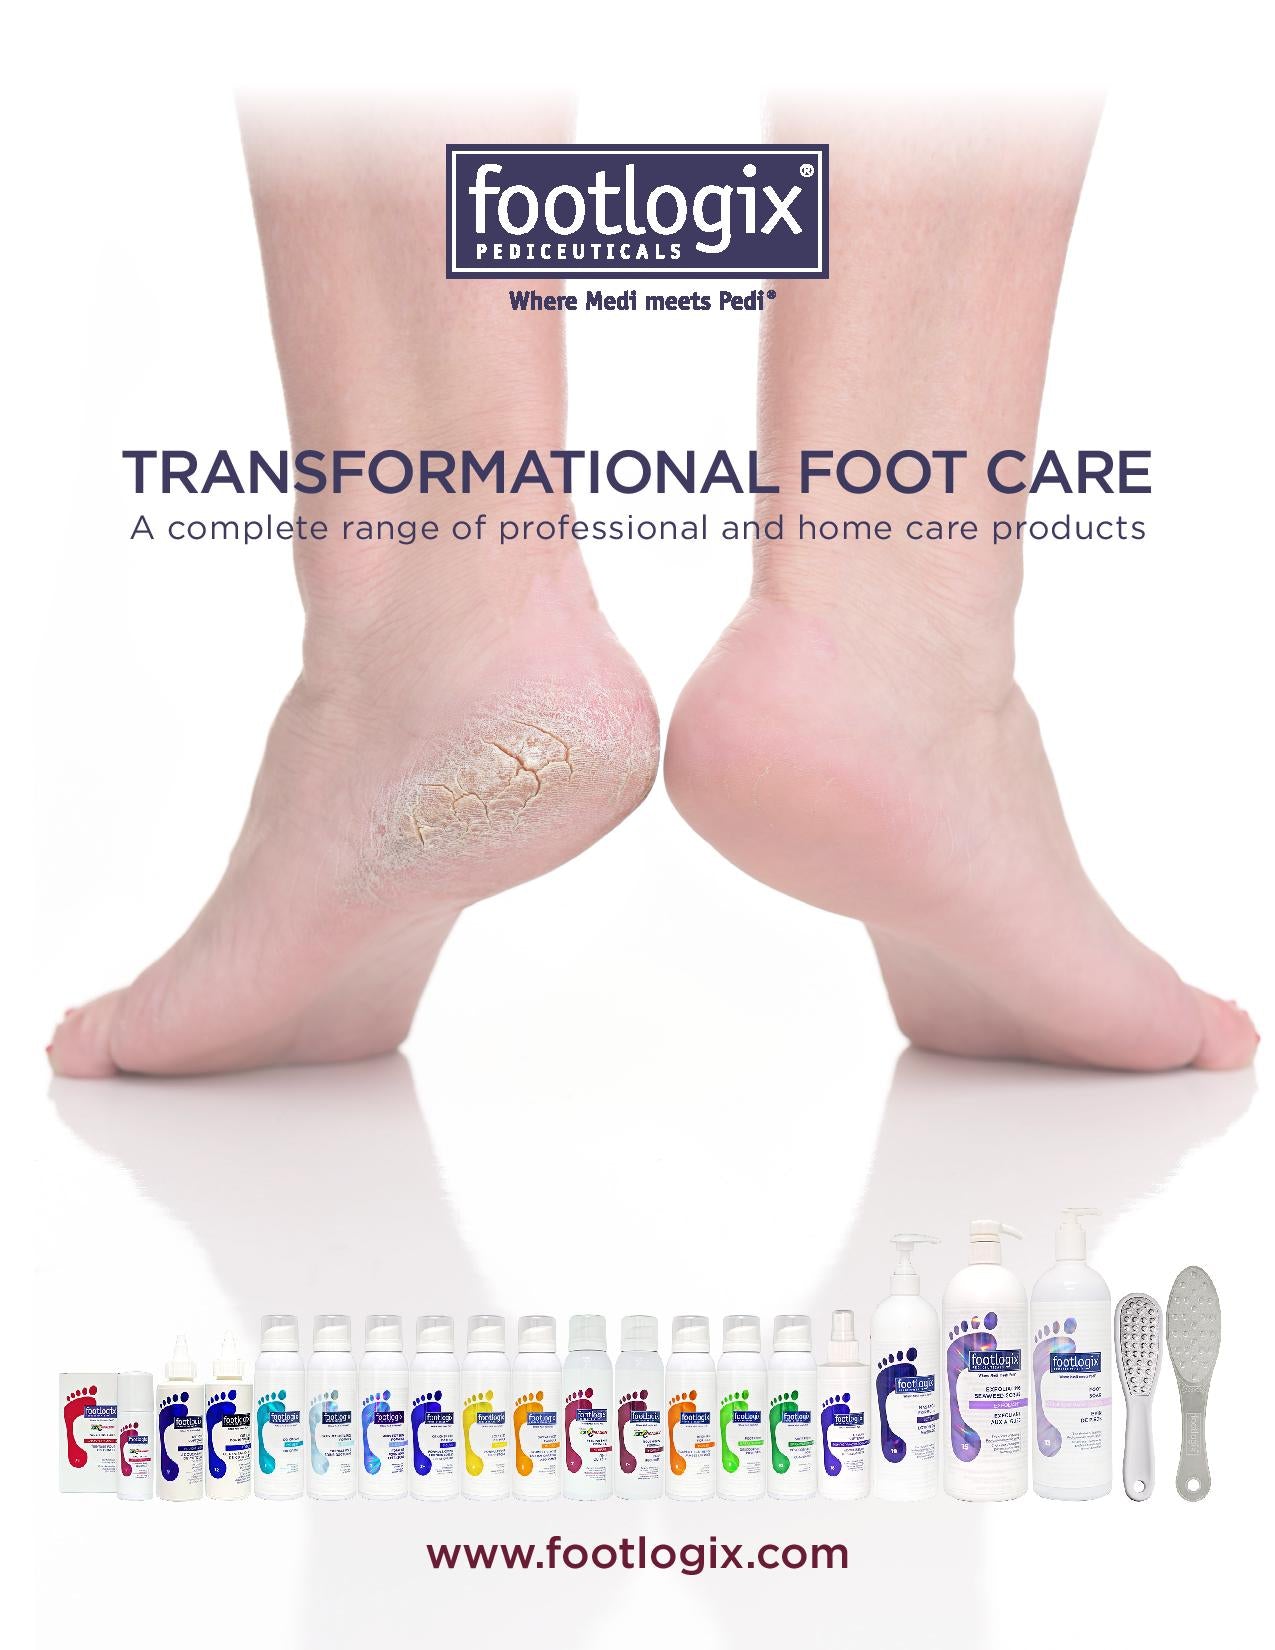 Footlogix 8 page Spiraleen Product Catalogue